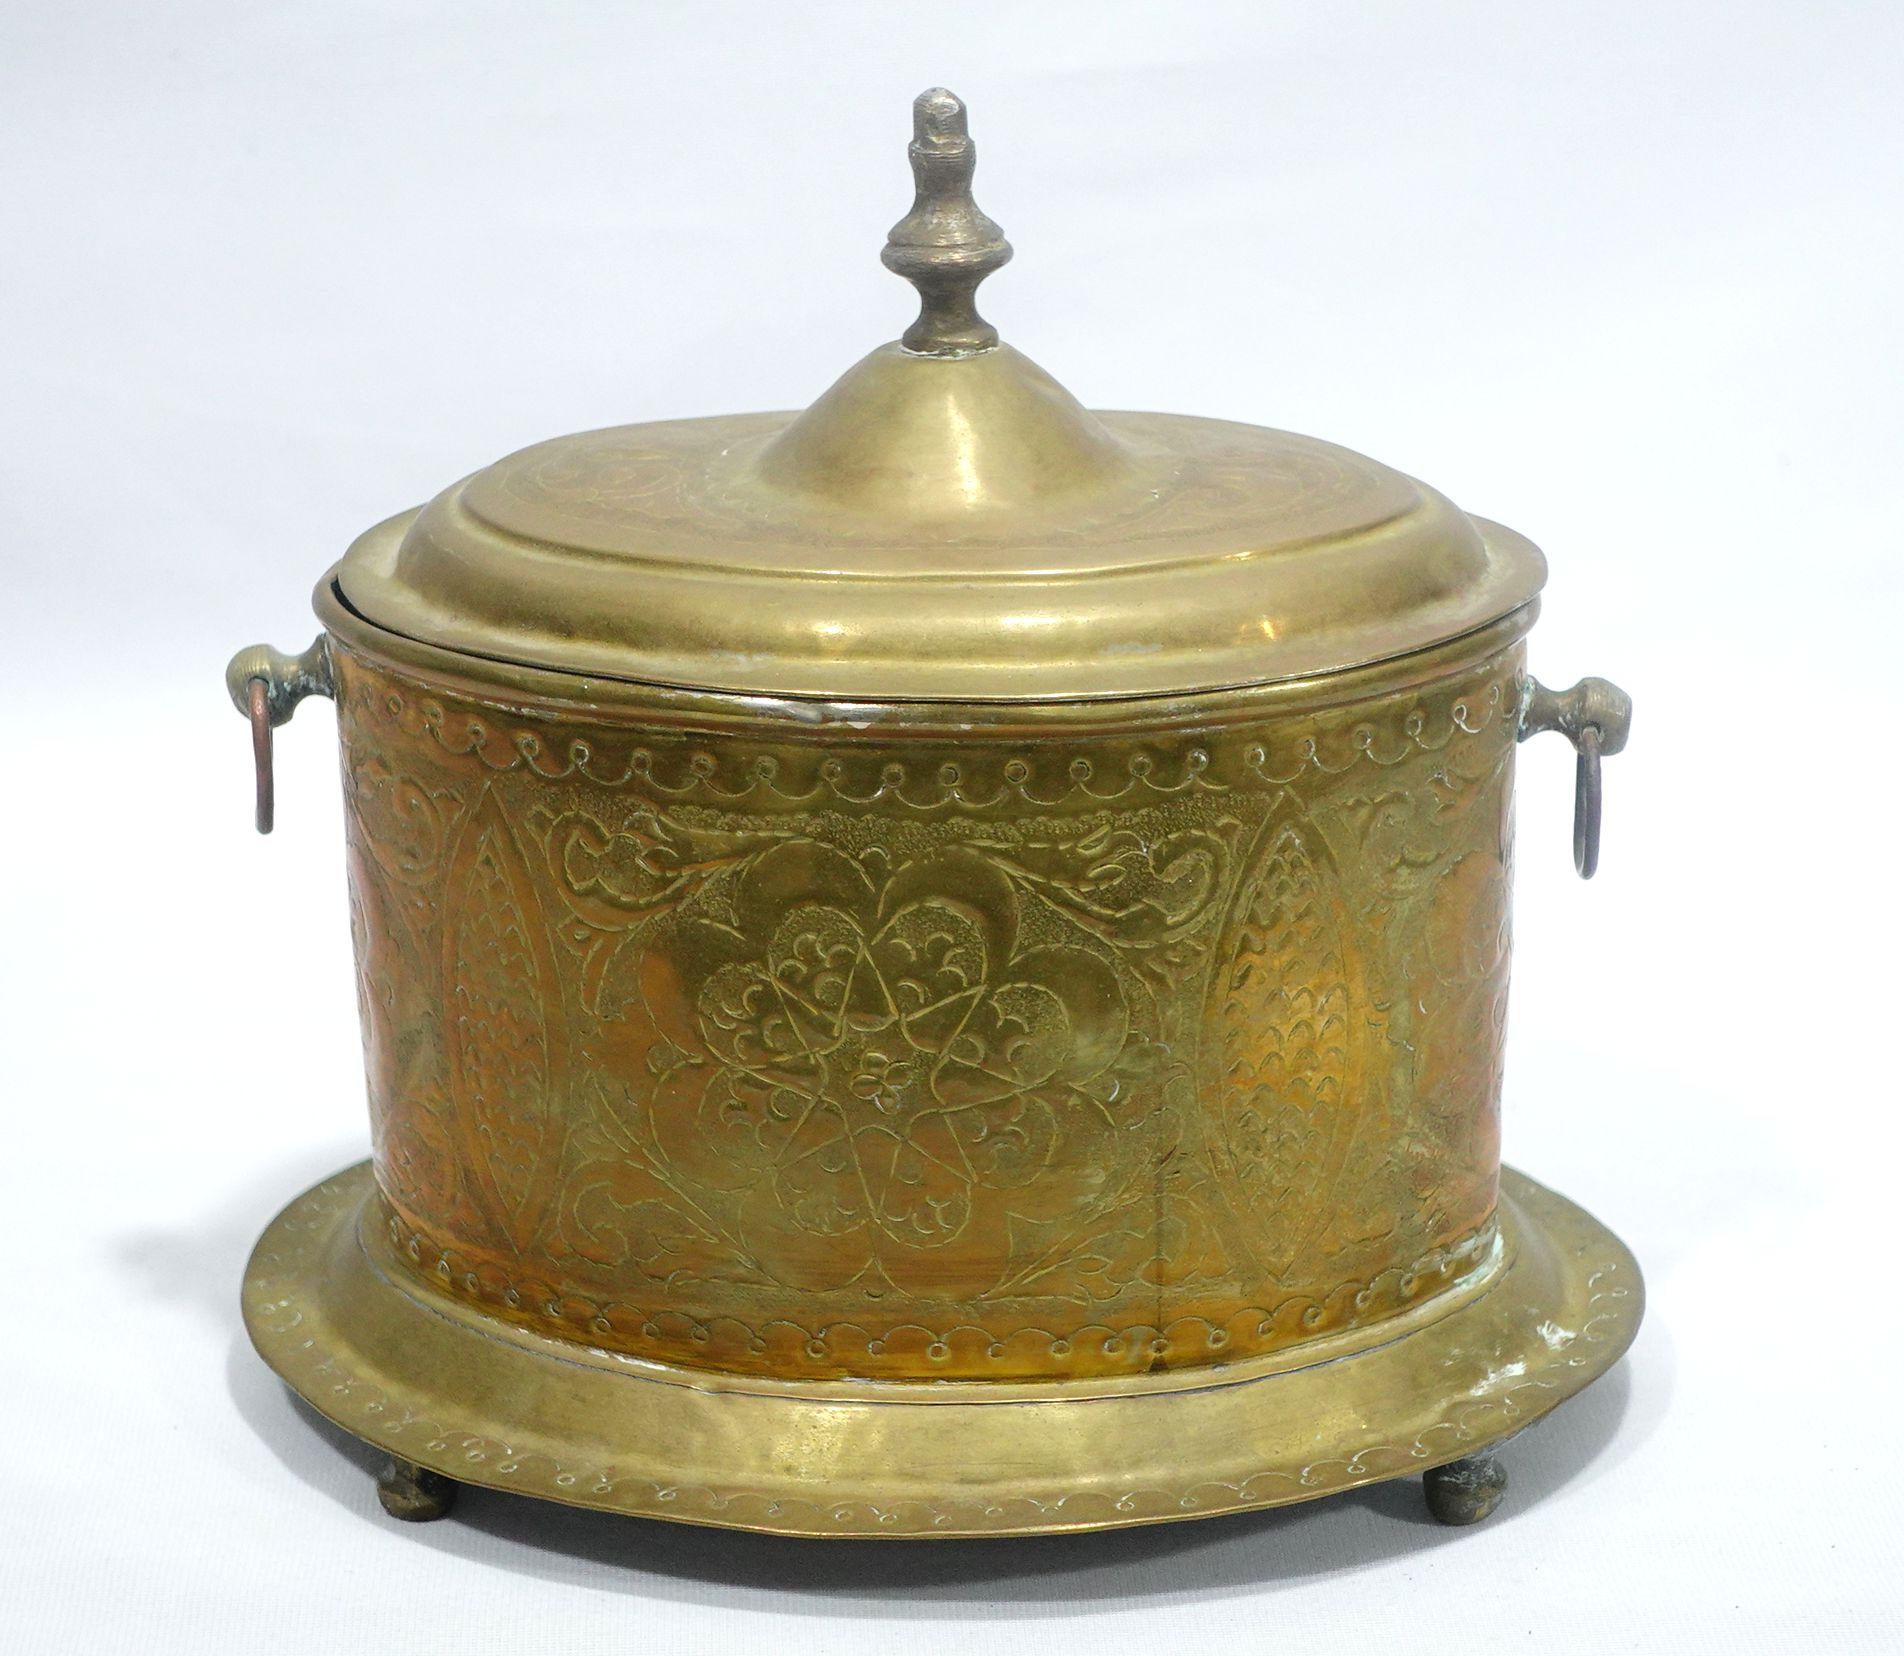 Antique Hand Hammered brass tobacco box on footed stand with floral patterns all around. RB#01.
It's a very old piece from the 18th century
